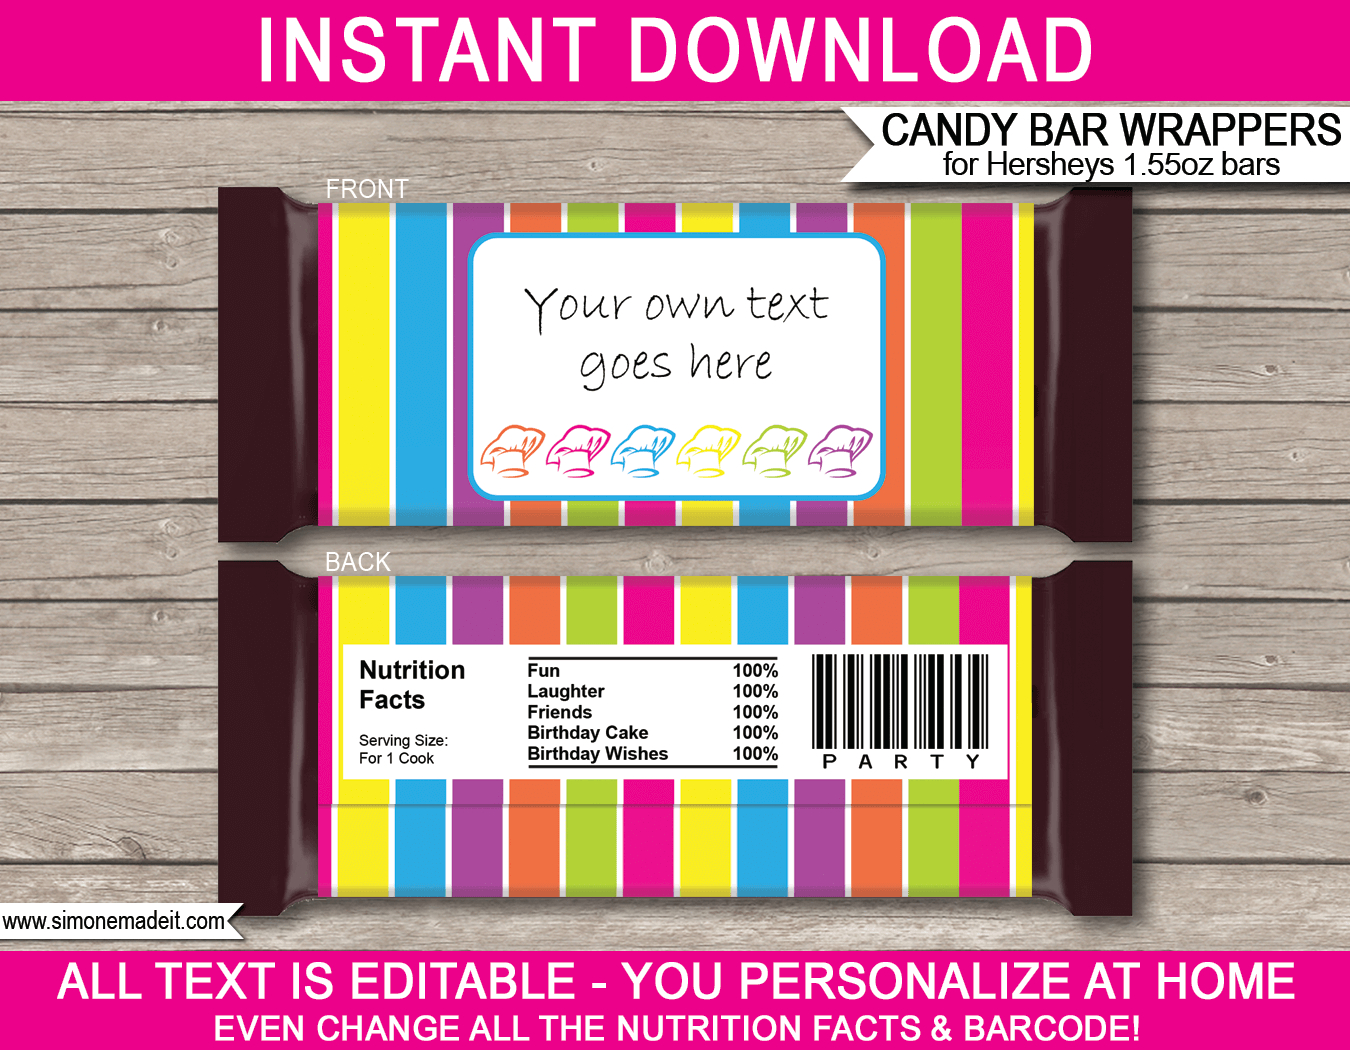 Candy Bar Wrapper Template For Mac - Ameasysite Regarding Candy Bar Wrapper Template For Word